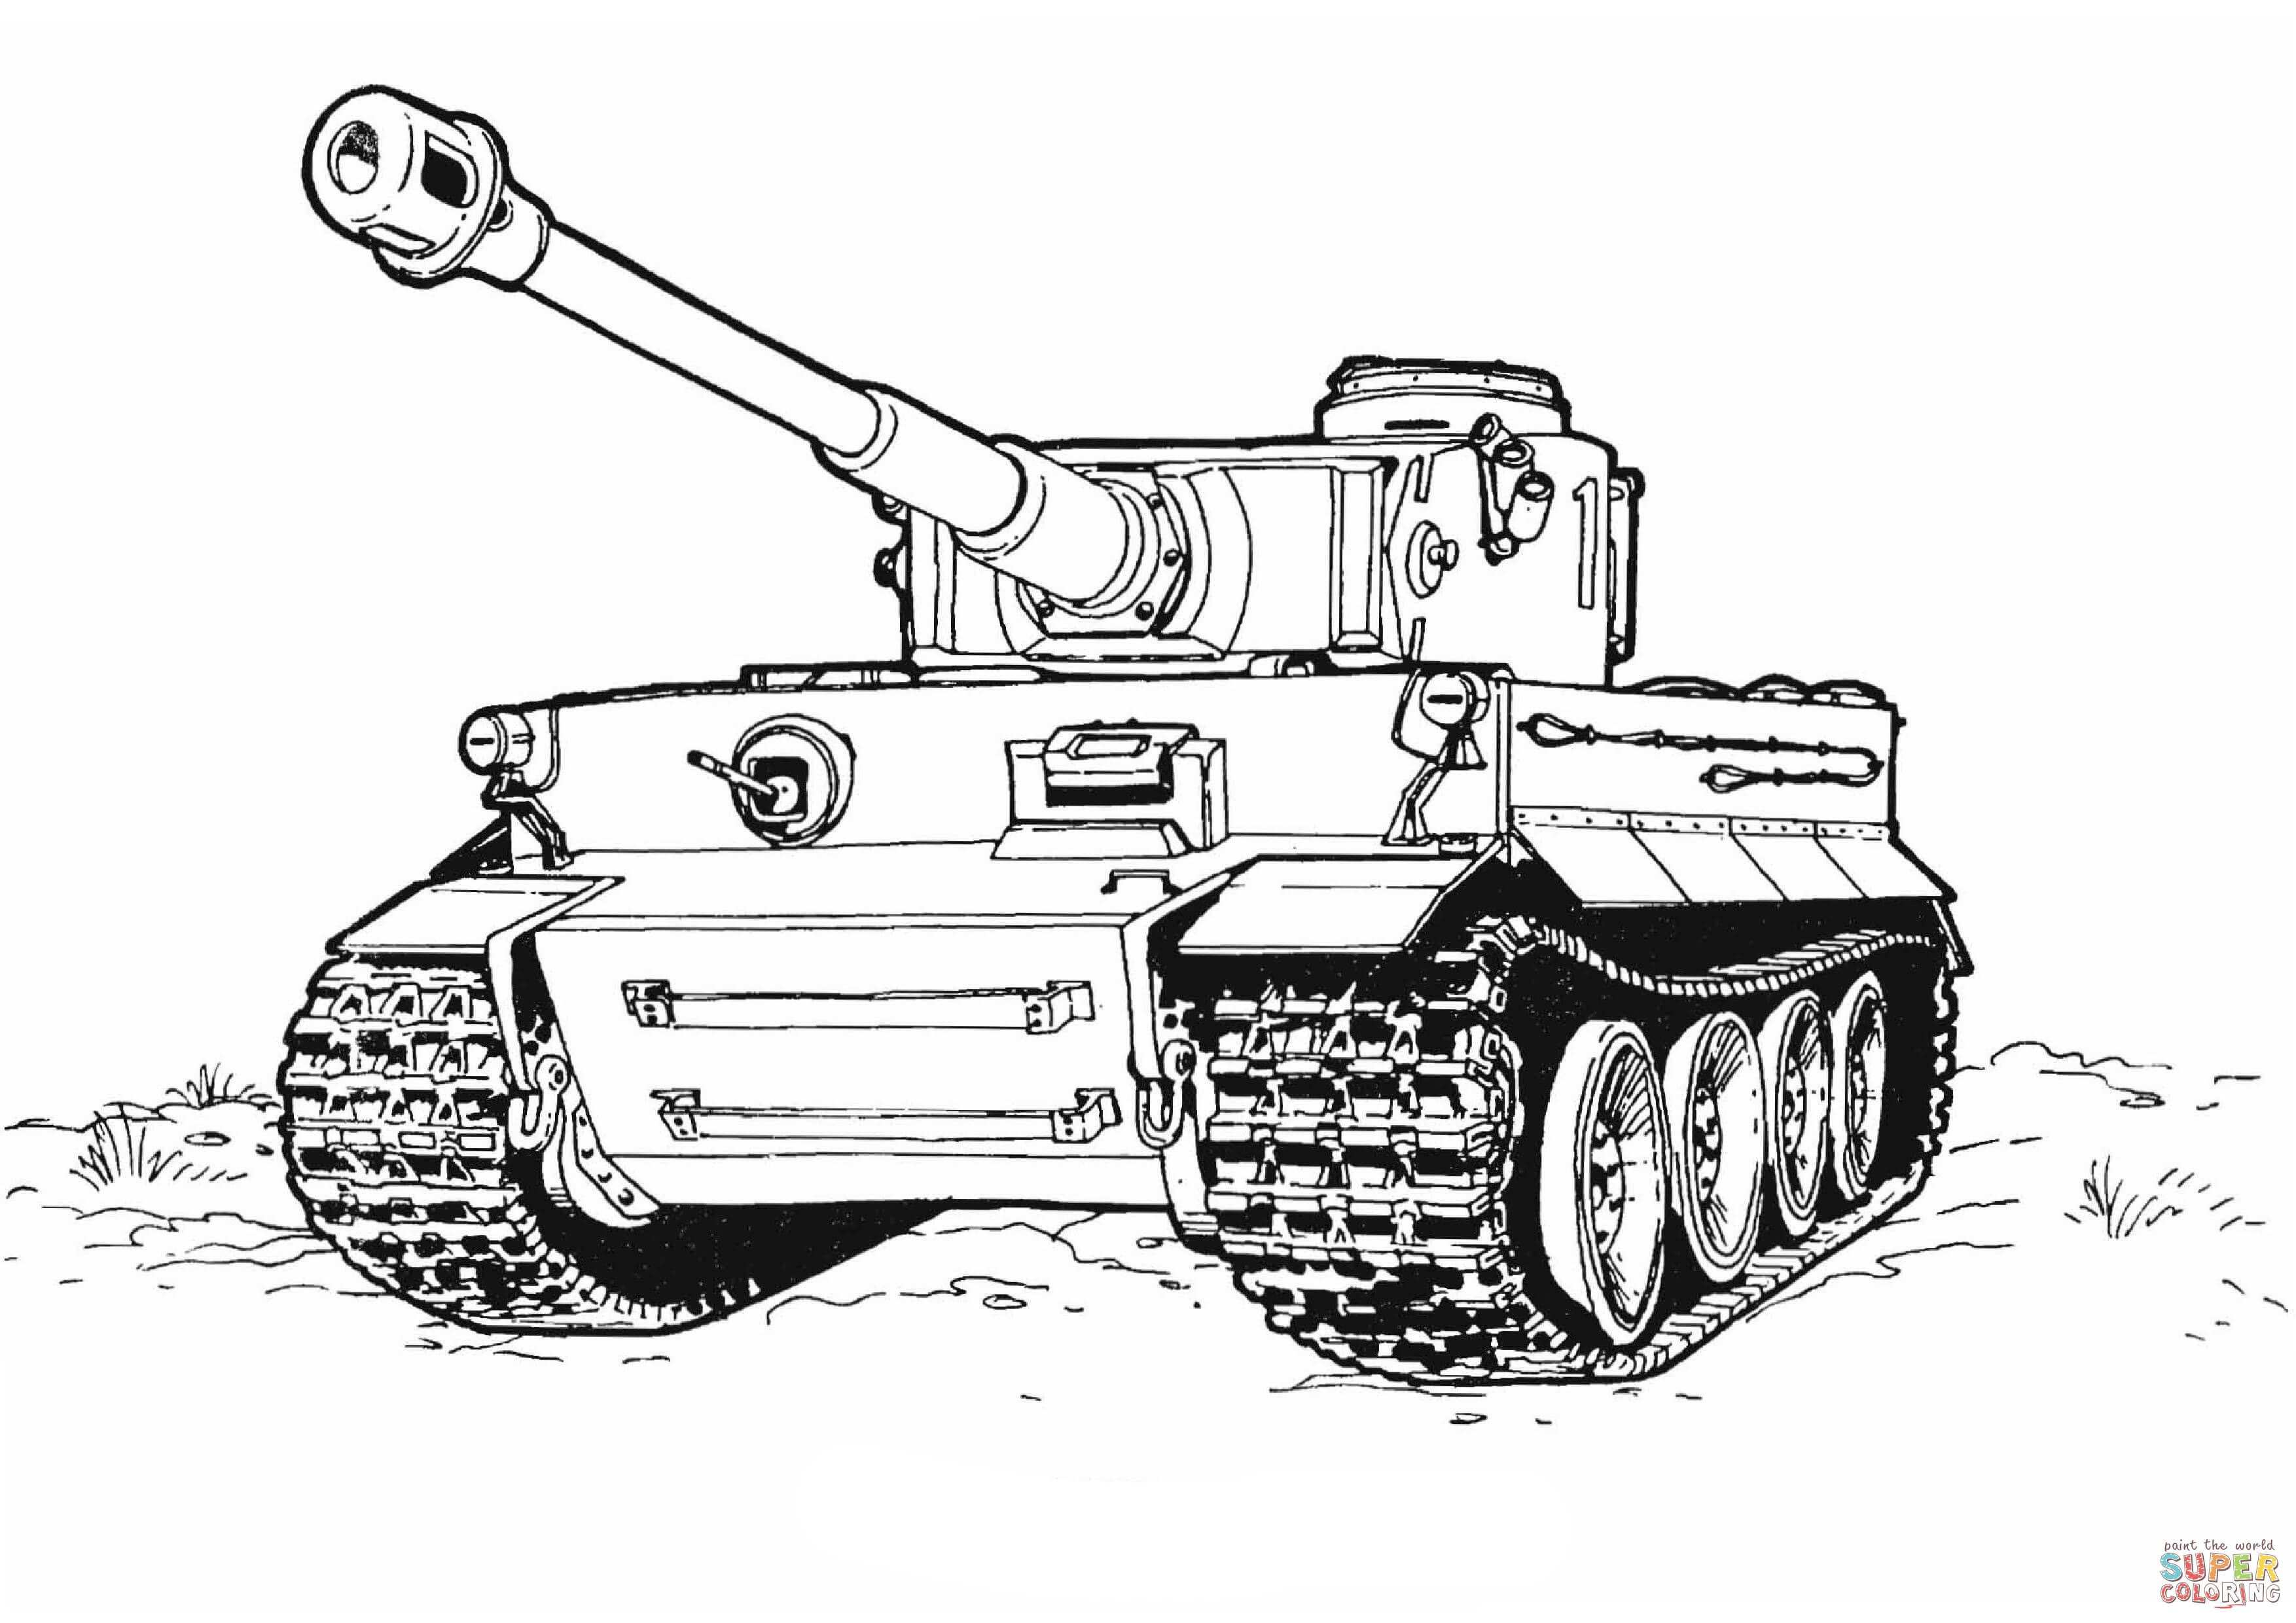 Tiger Tank Coloring Page From Tanks Category Select From 27260